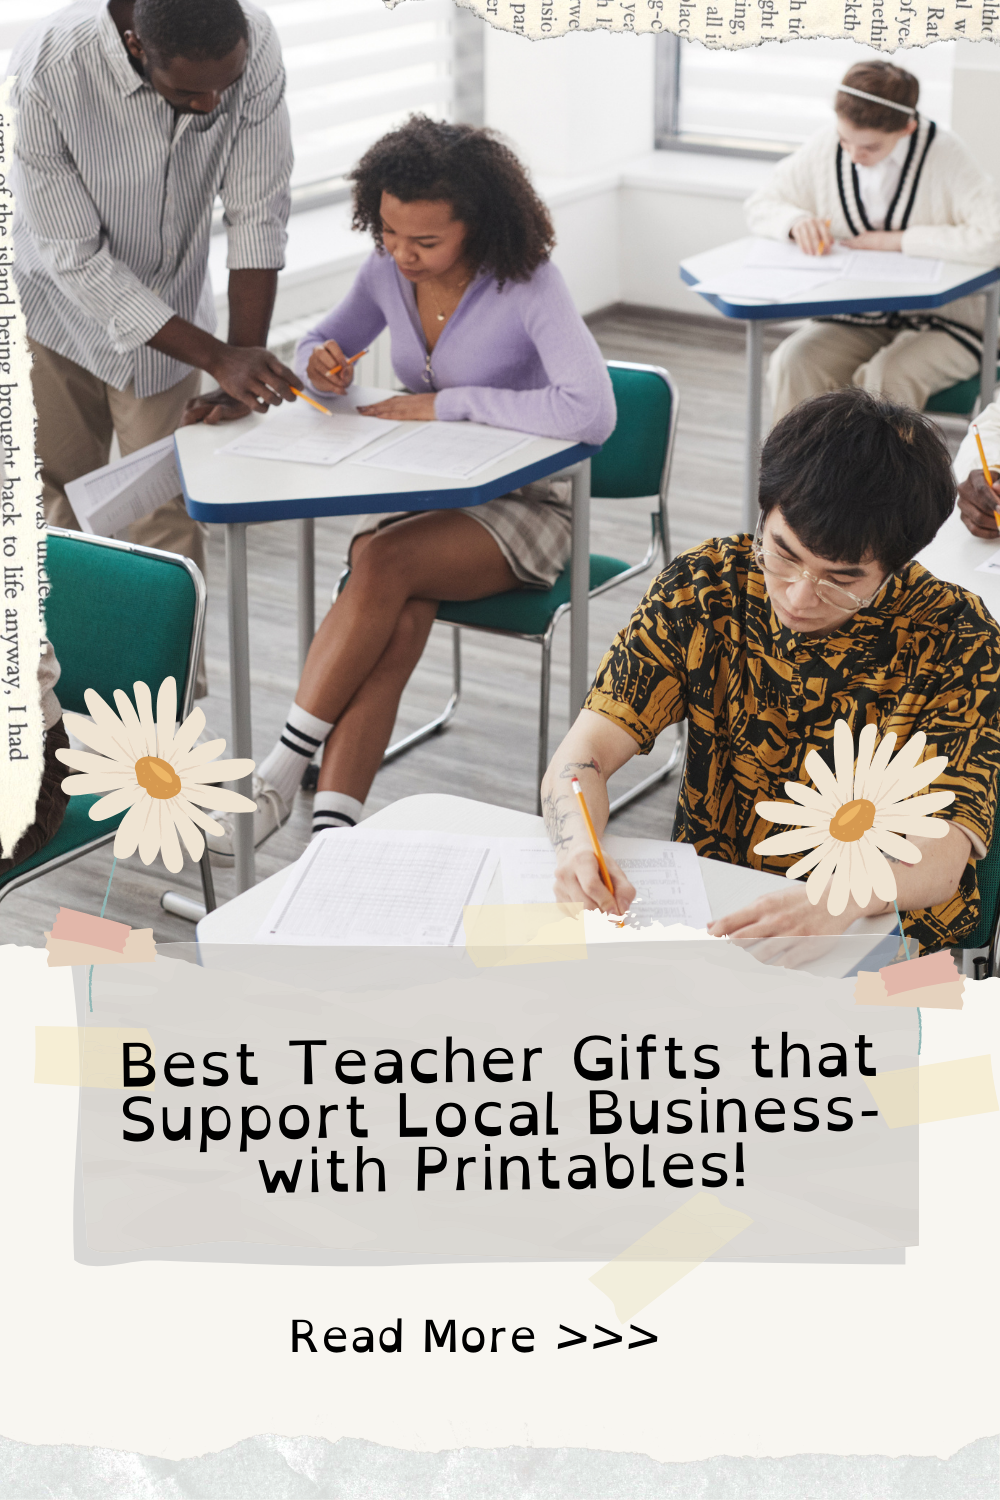 Best Teacher Gifts that Support Local Business- with Printables!